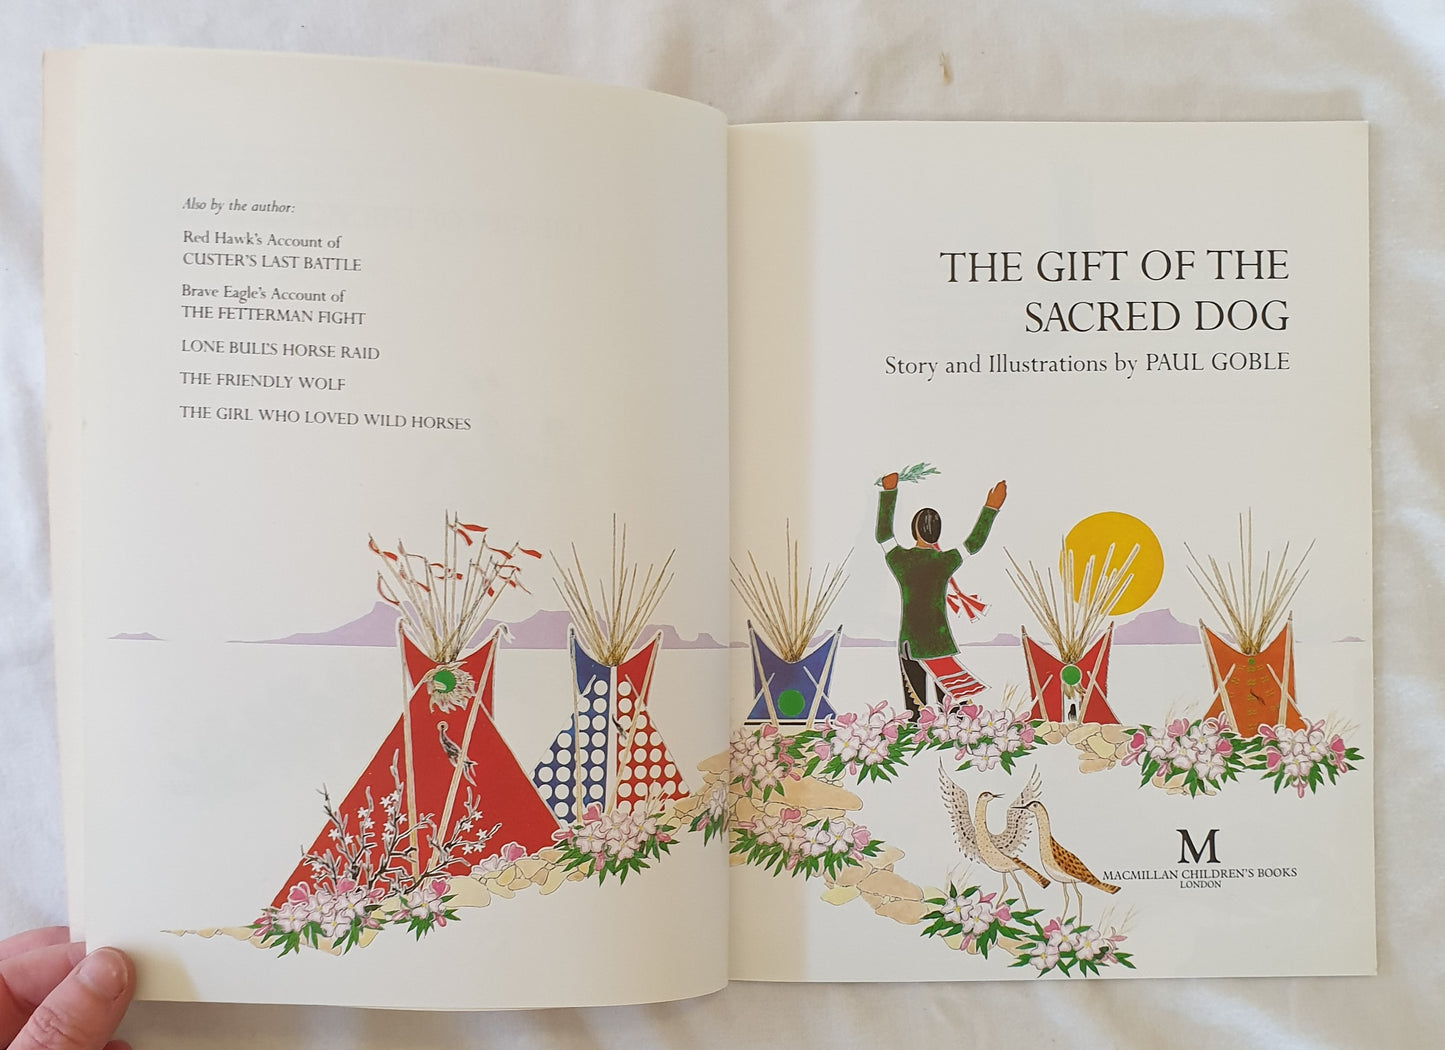 The Gift of the Sacred Dog by Paul Goble